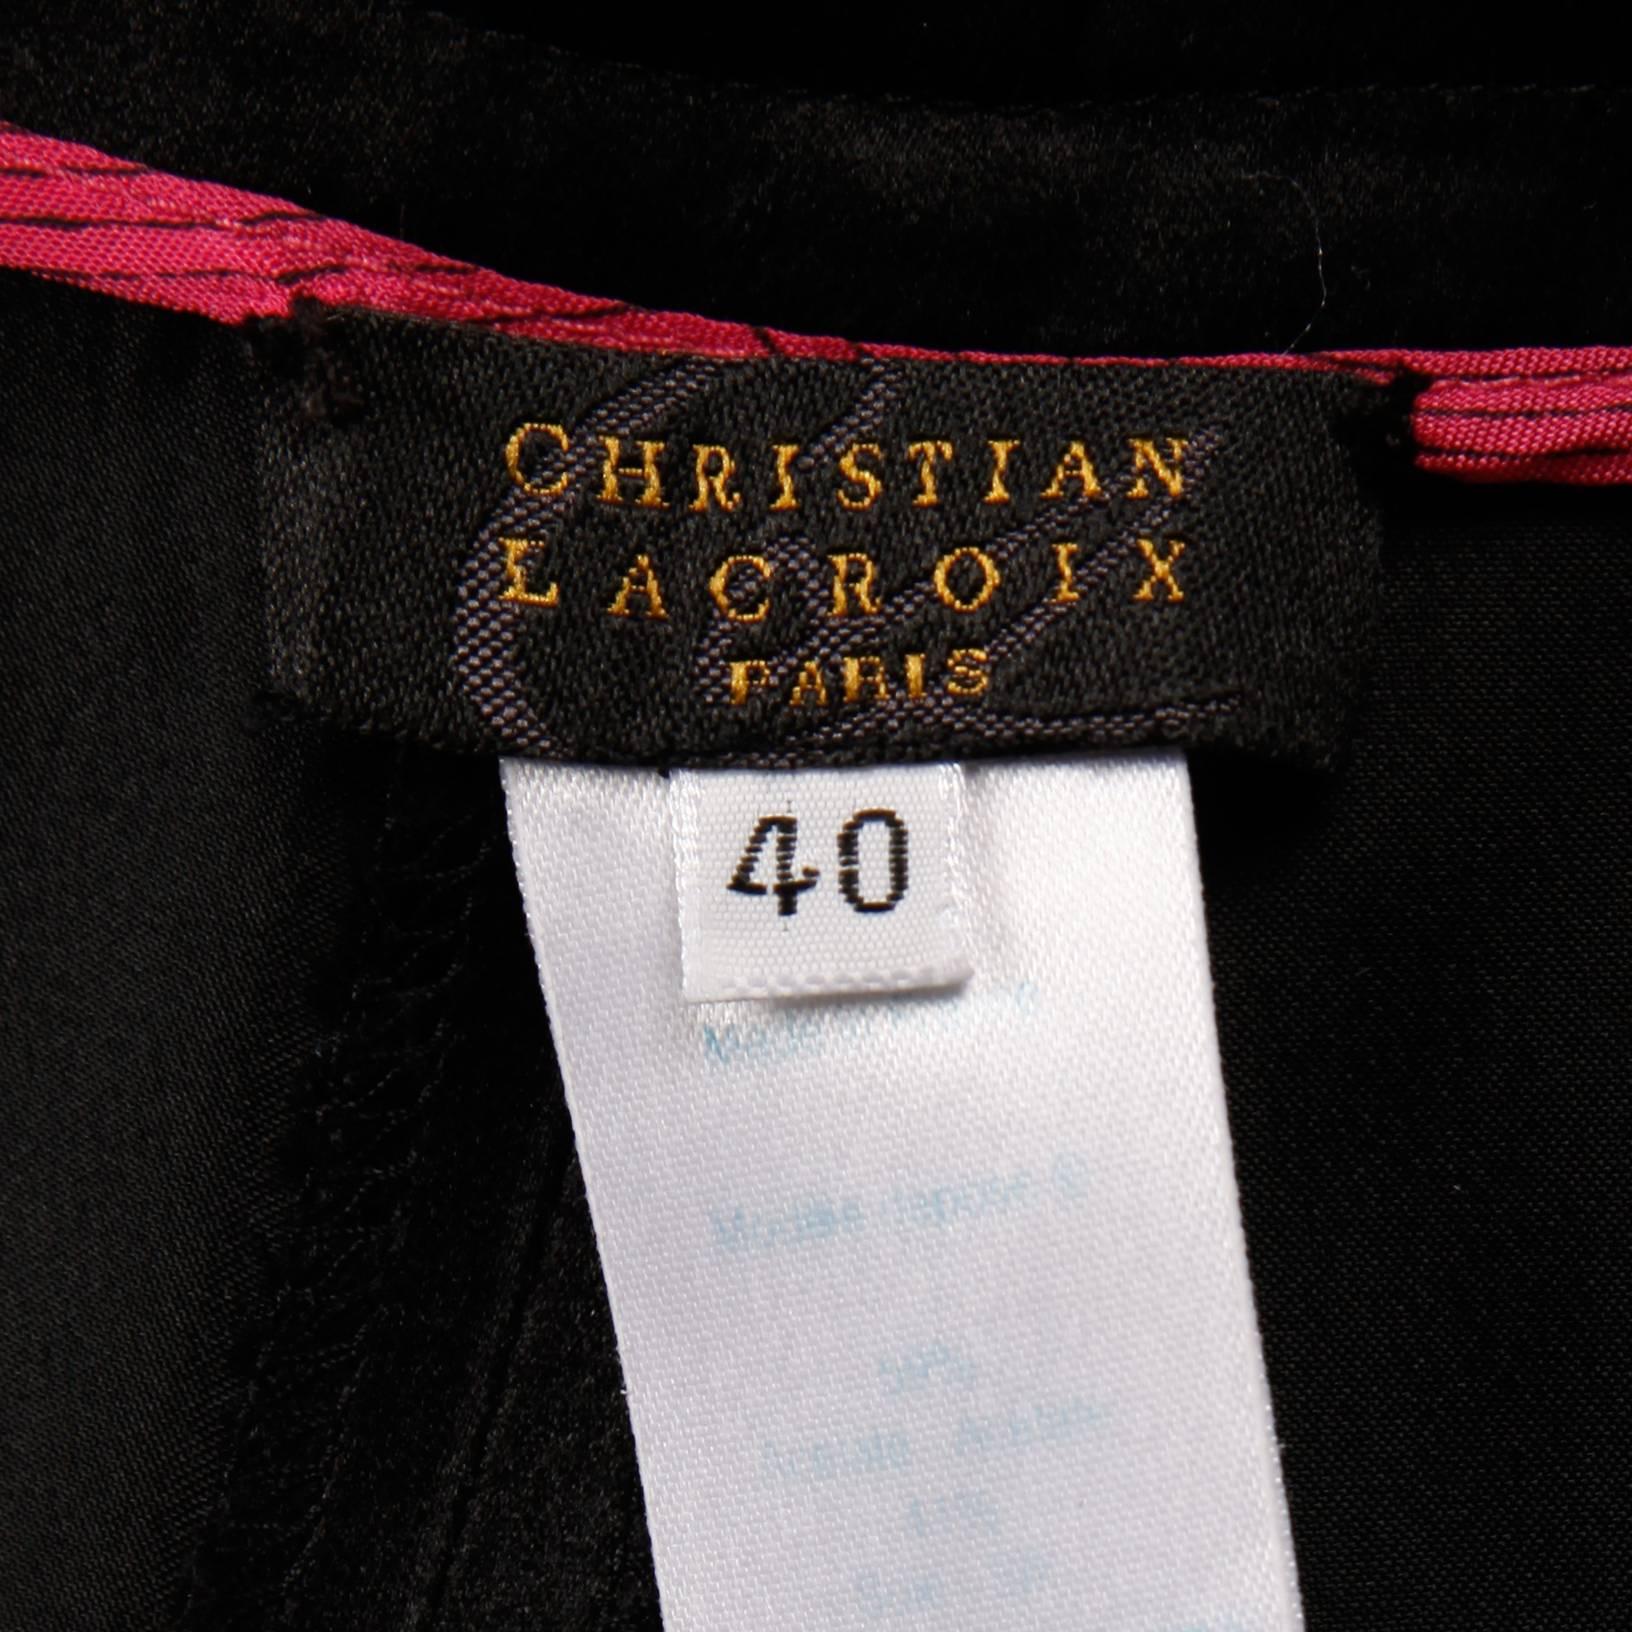 Completely unique Christian Lacroix silk blend satin pants with a curved "bubble" hem. Unlined with front zip, button and hook closure. Hidden side pockets. 59% acetate, 41% silk. The marked size is 40, and the pants fit like a modern size